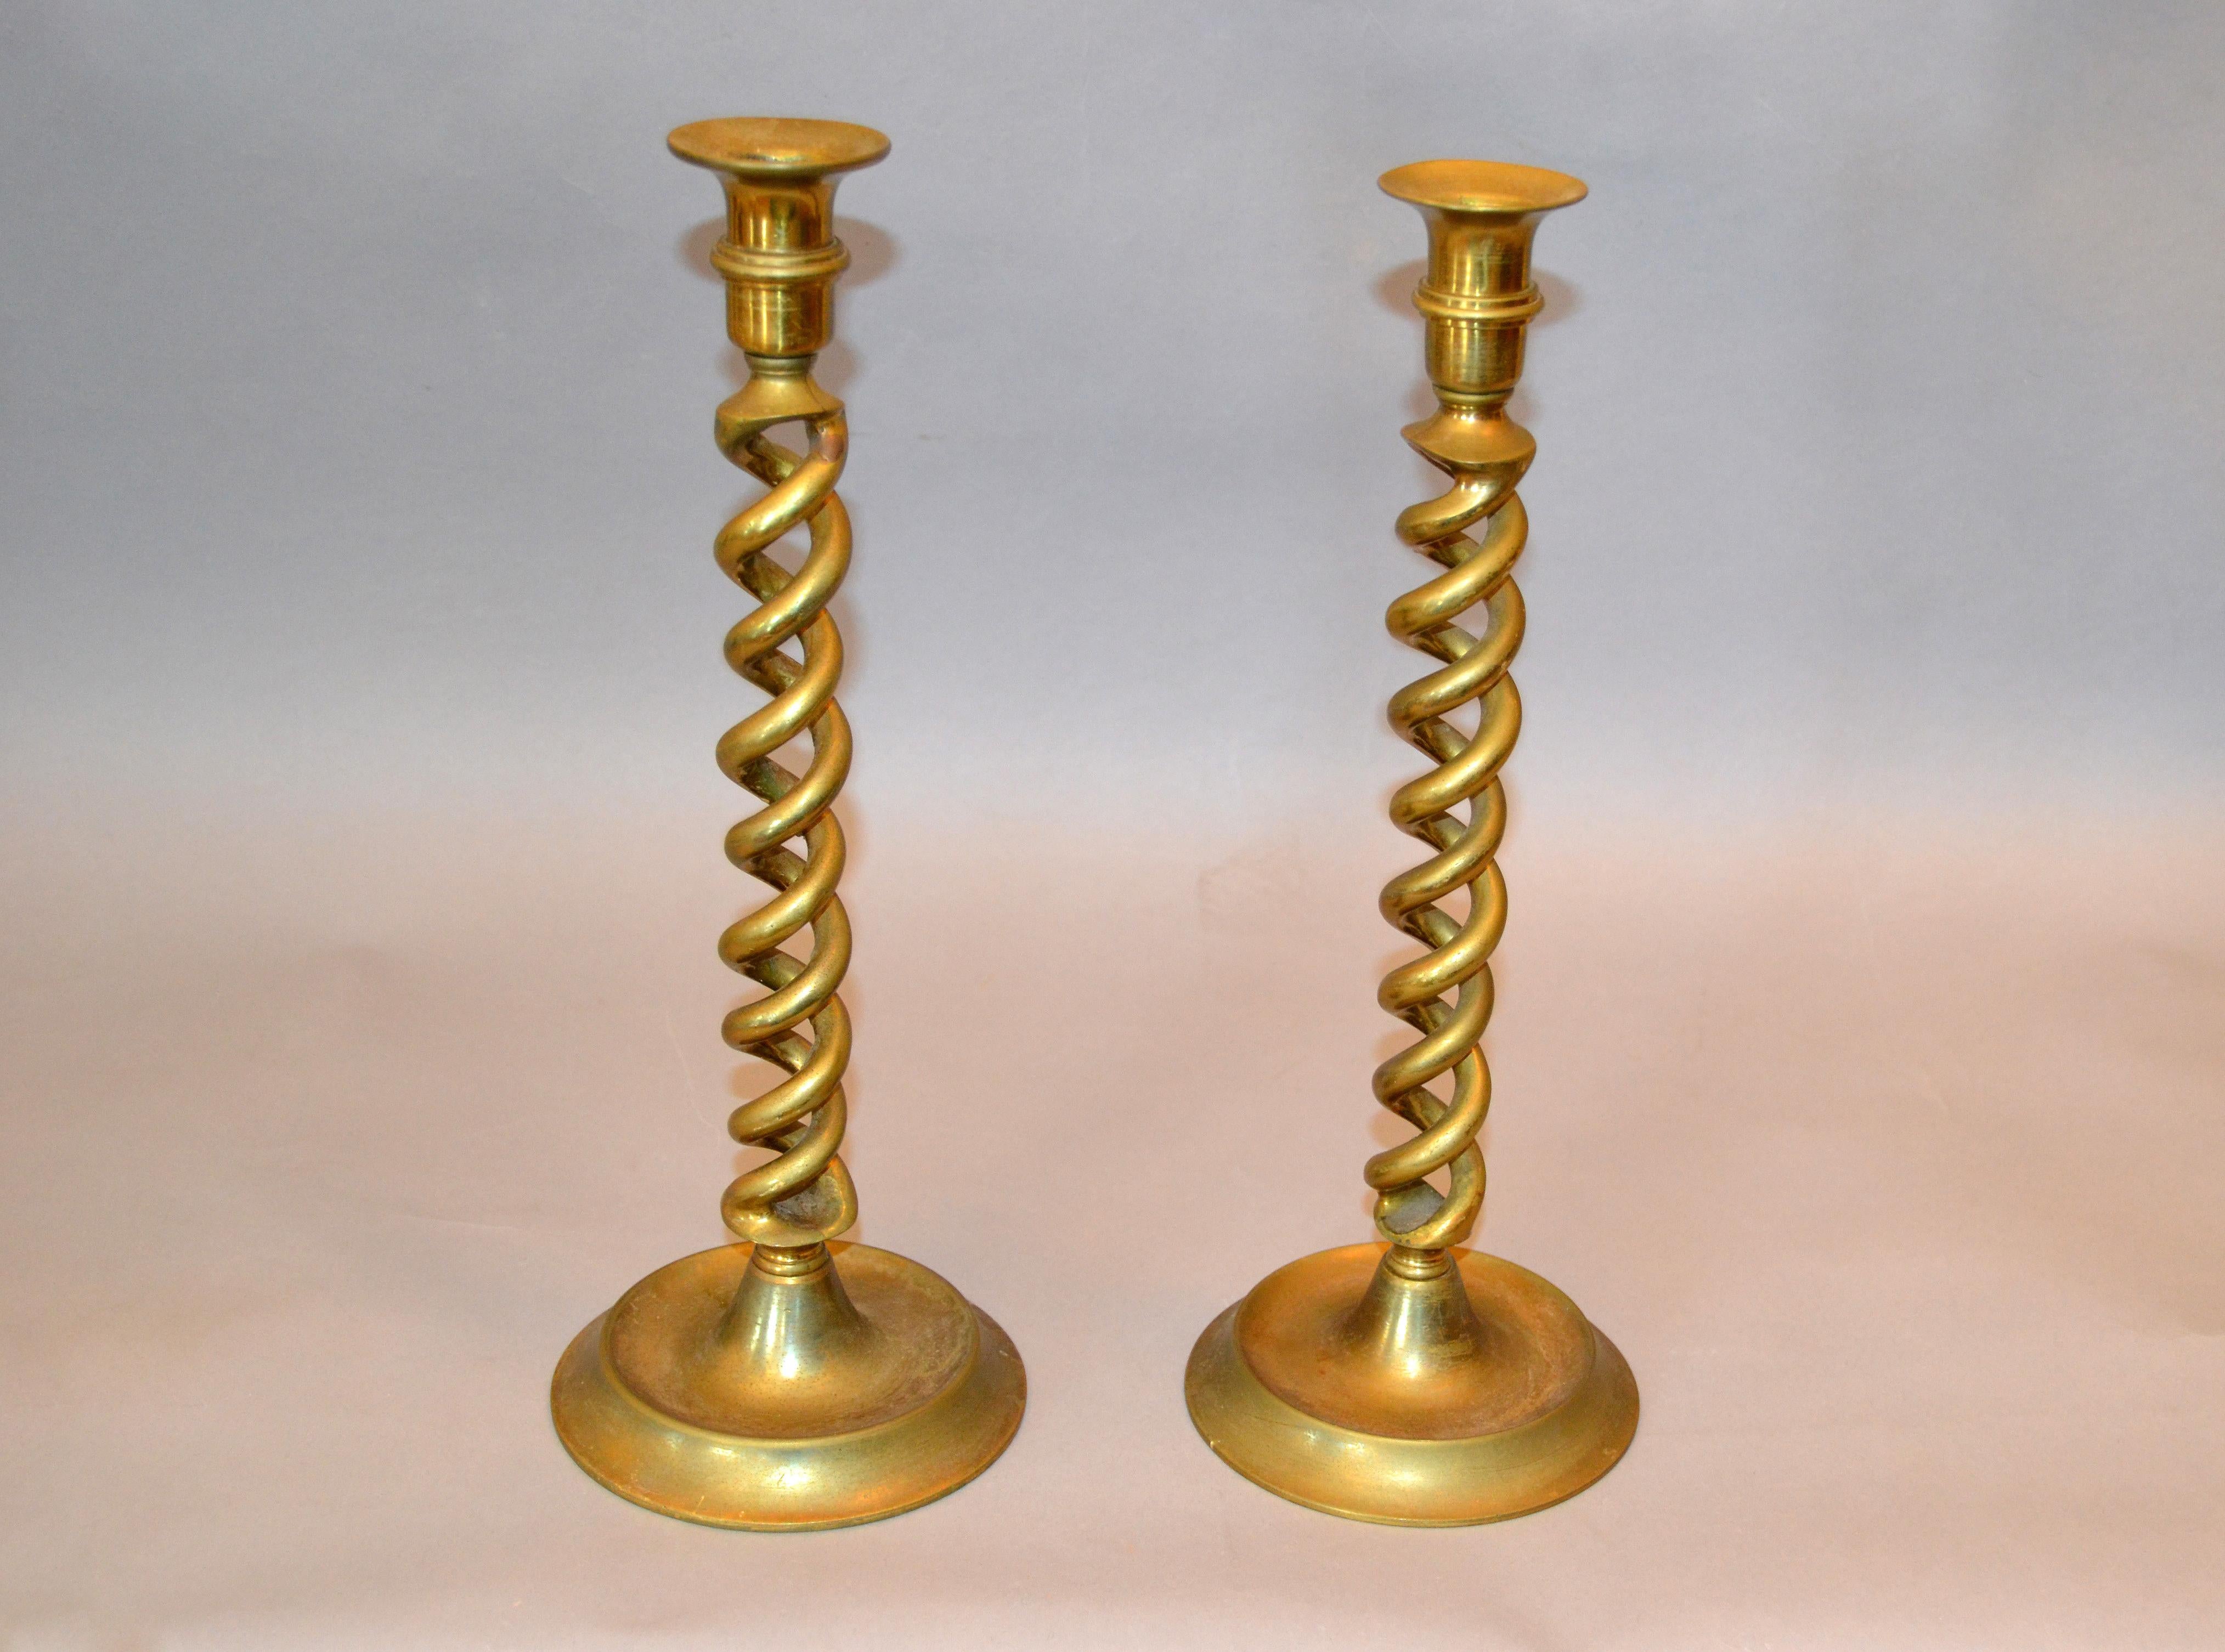 A pair of English 1940s Bronze spiral candlesticks with round base.
The stem of each candlestick is spiralling upward to support the nozzle.
Each candlestick is set on a round base.
Both are marked underneath, made in England.
A great way to